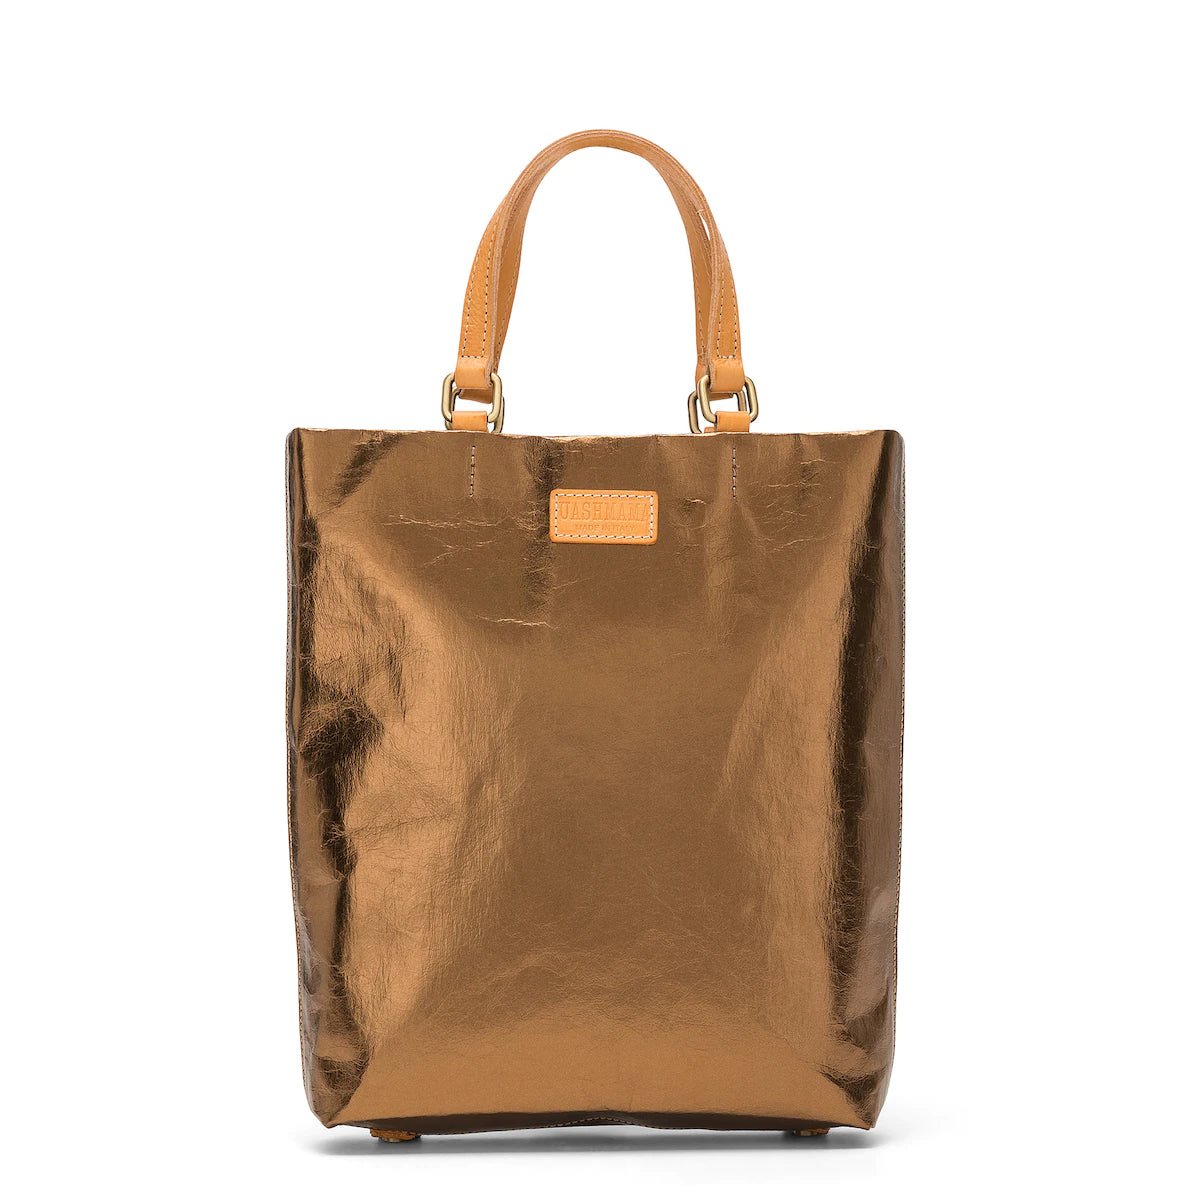 A rectangular washable paper tote bag is shown, with two top handles and a logo UASHMAMA stamp on the front. It is metallic bronze in colour. 